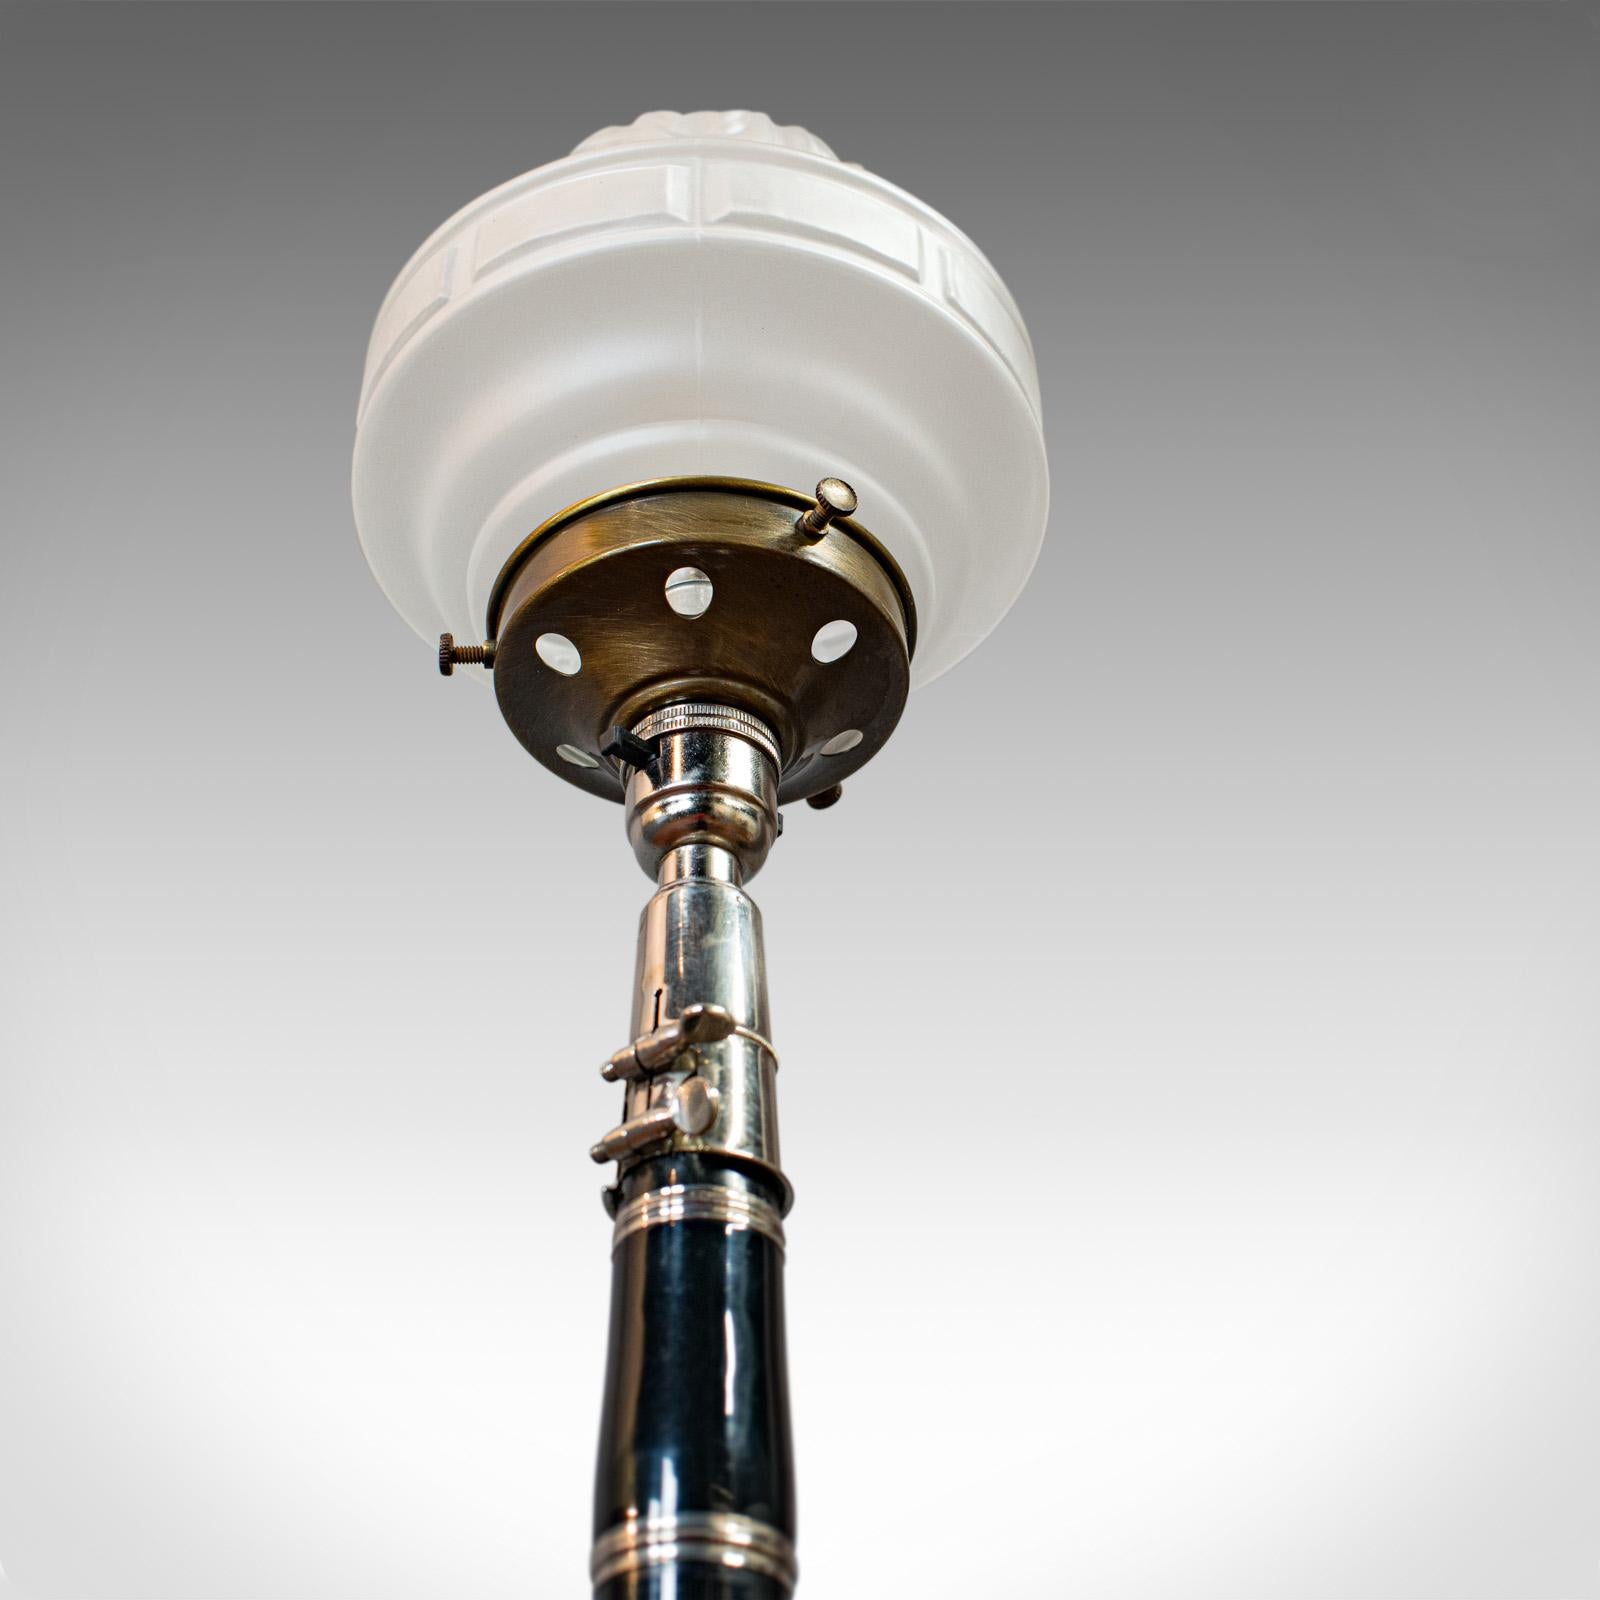 Glass Vintage Clarinet Lamp, Bespoke, Handmade, Table, Light, Crafted, Instrument